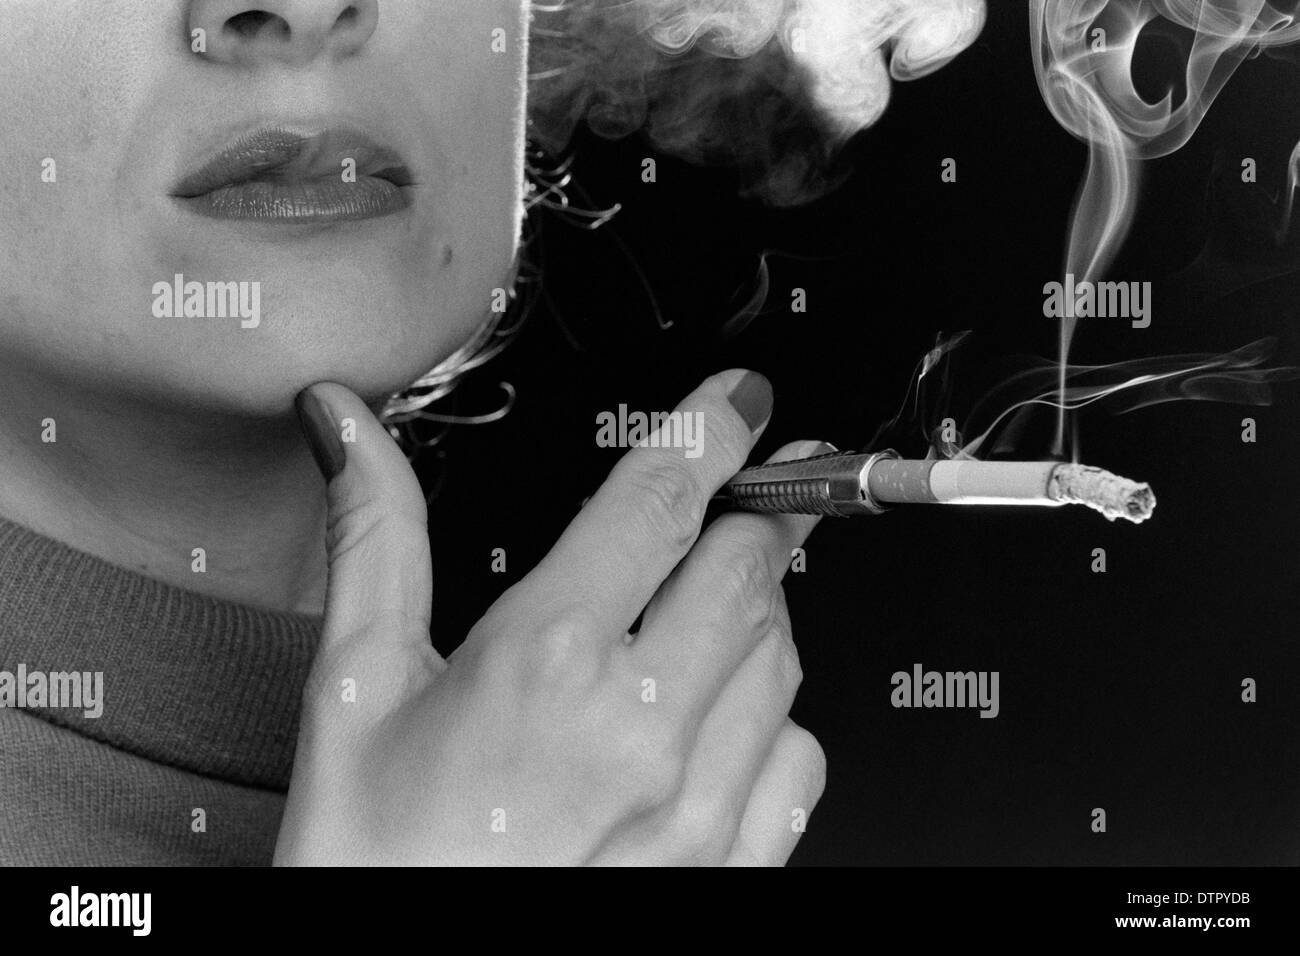 A close-up of a woman smoking a cigarette using a cigarette holder Stock Photo